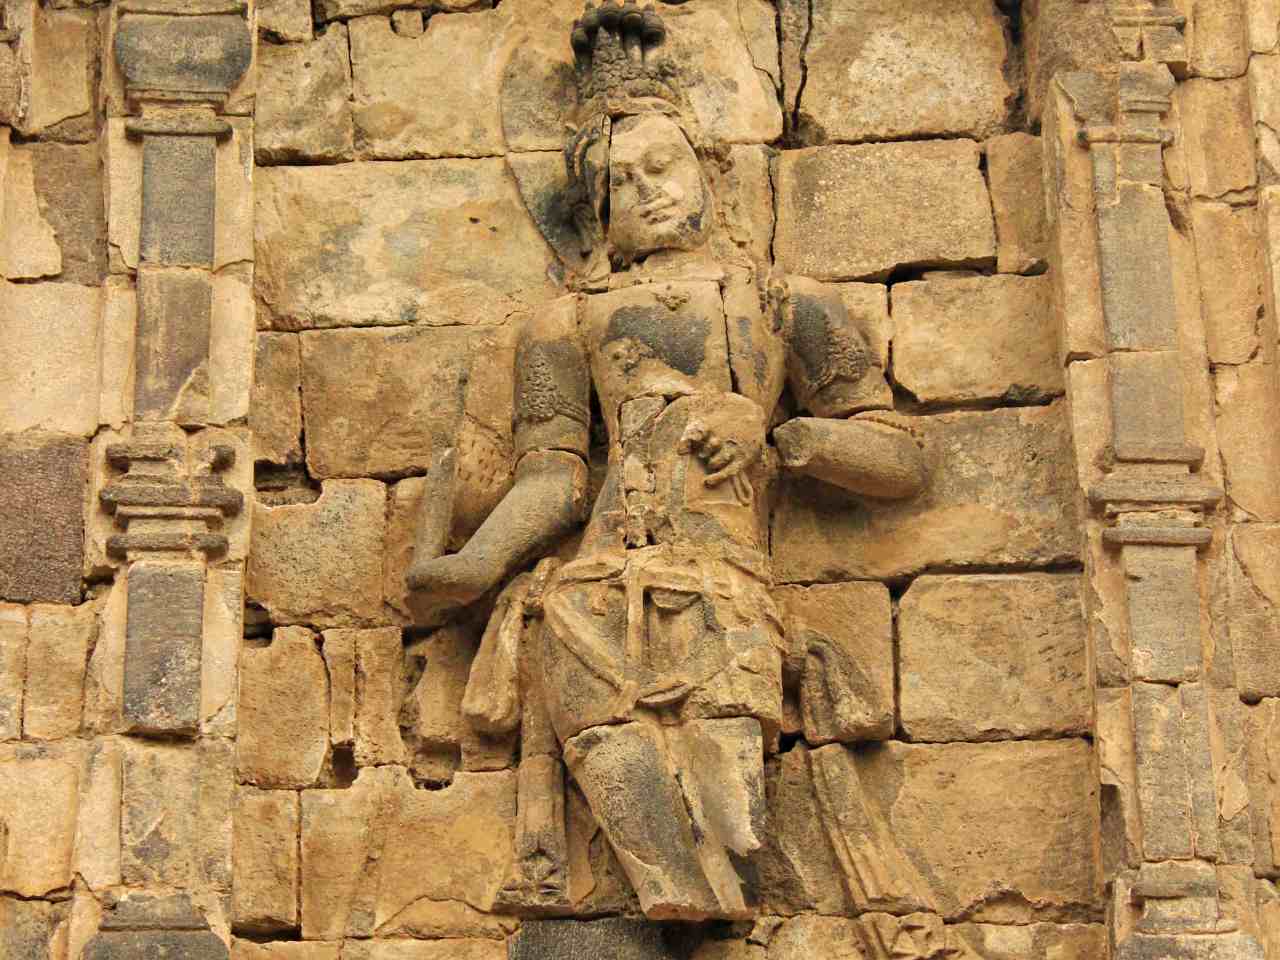 sculpture in the temple wall